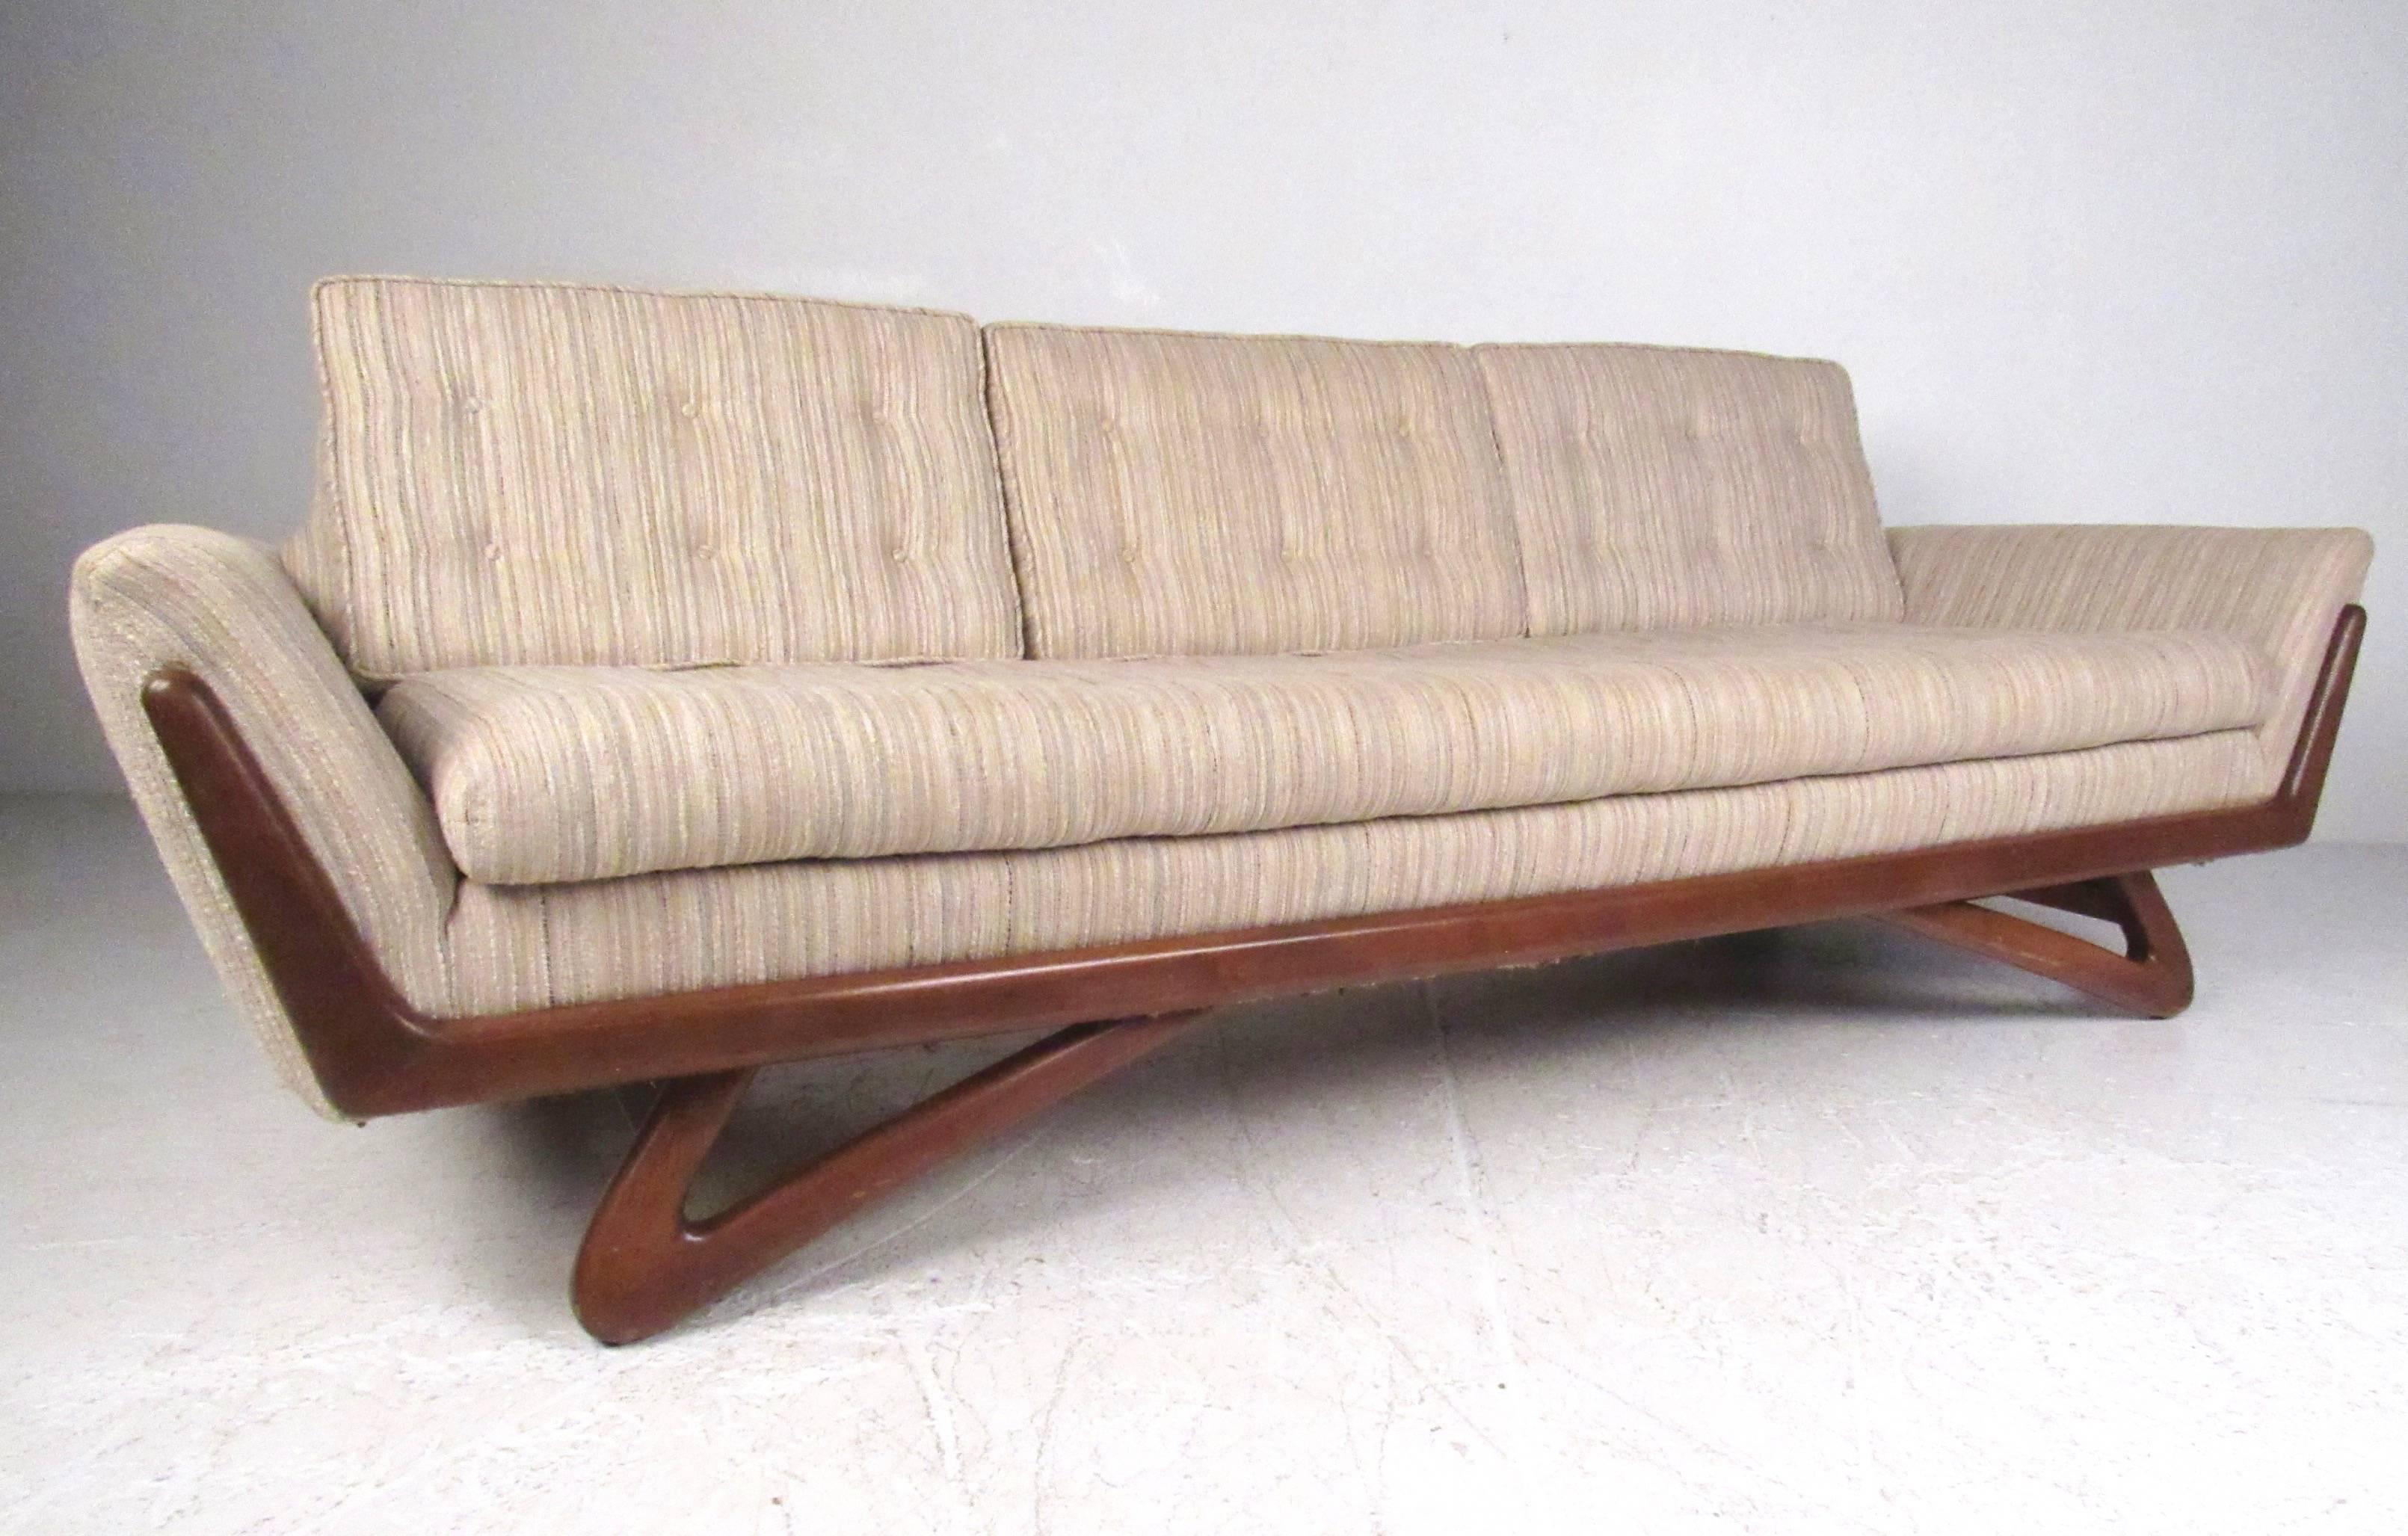 This beautiful vintage modern sofa features the innovative design of Mid-Century great Adrian Pearsall. Sculpted walnut legs and frame paired with tufted vintage fabric and cutaway seat back all add to the appeal of this uniquely shaped 